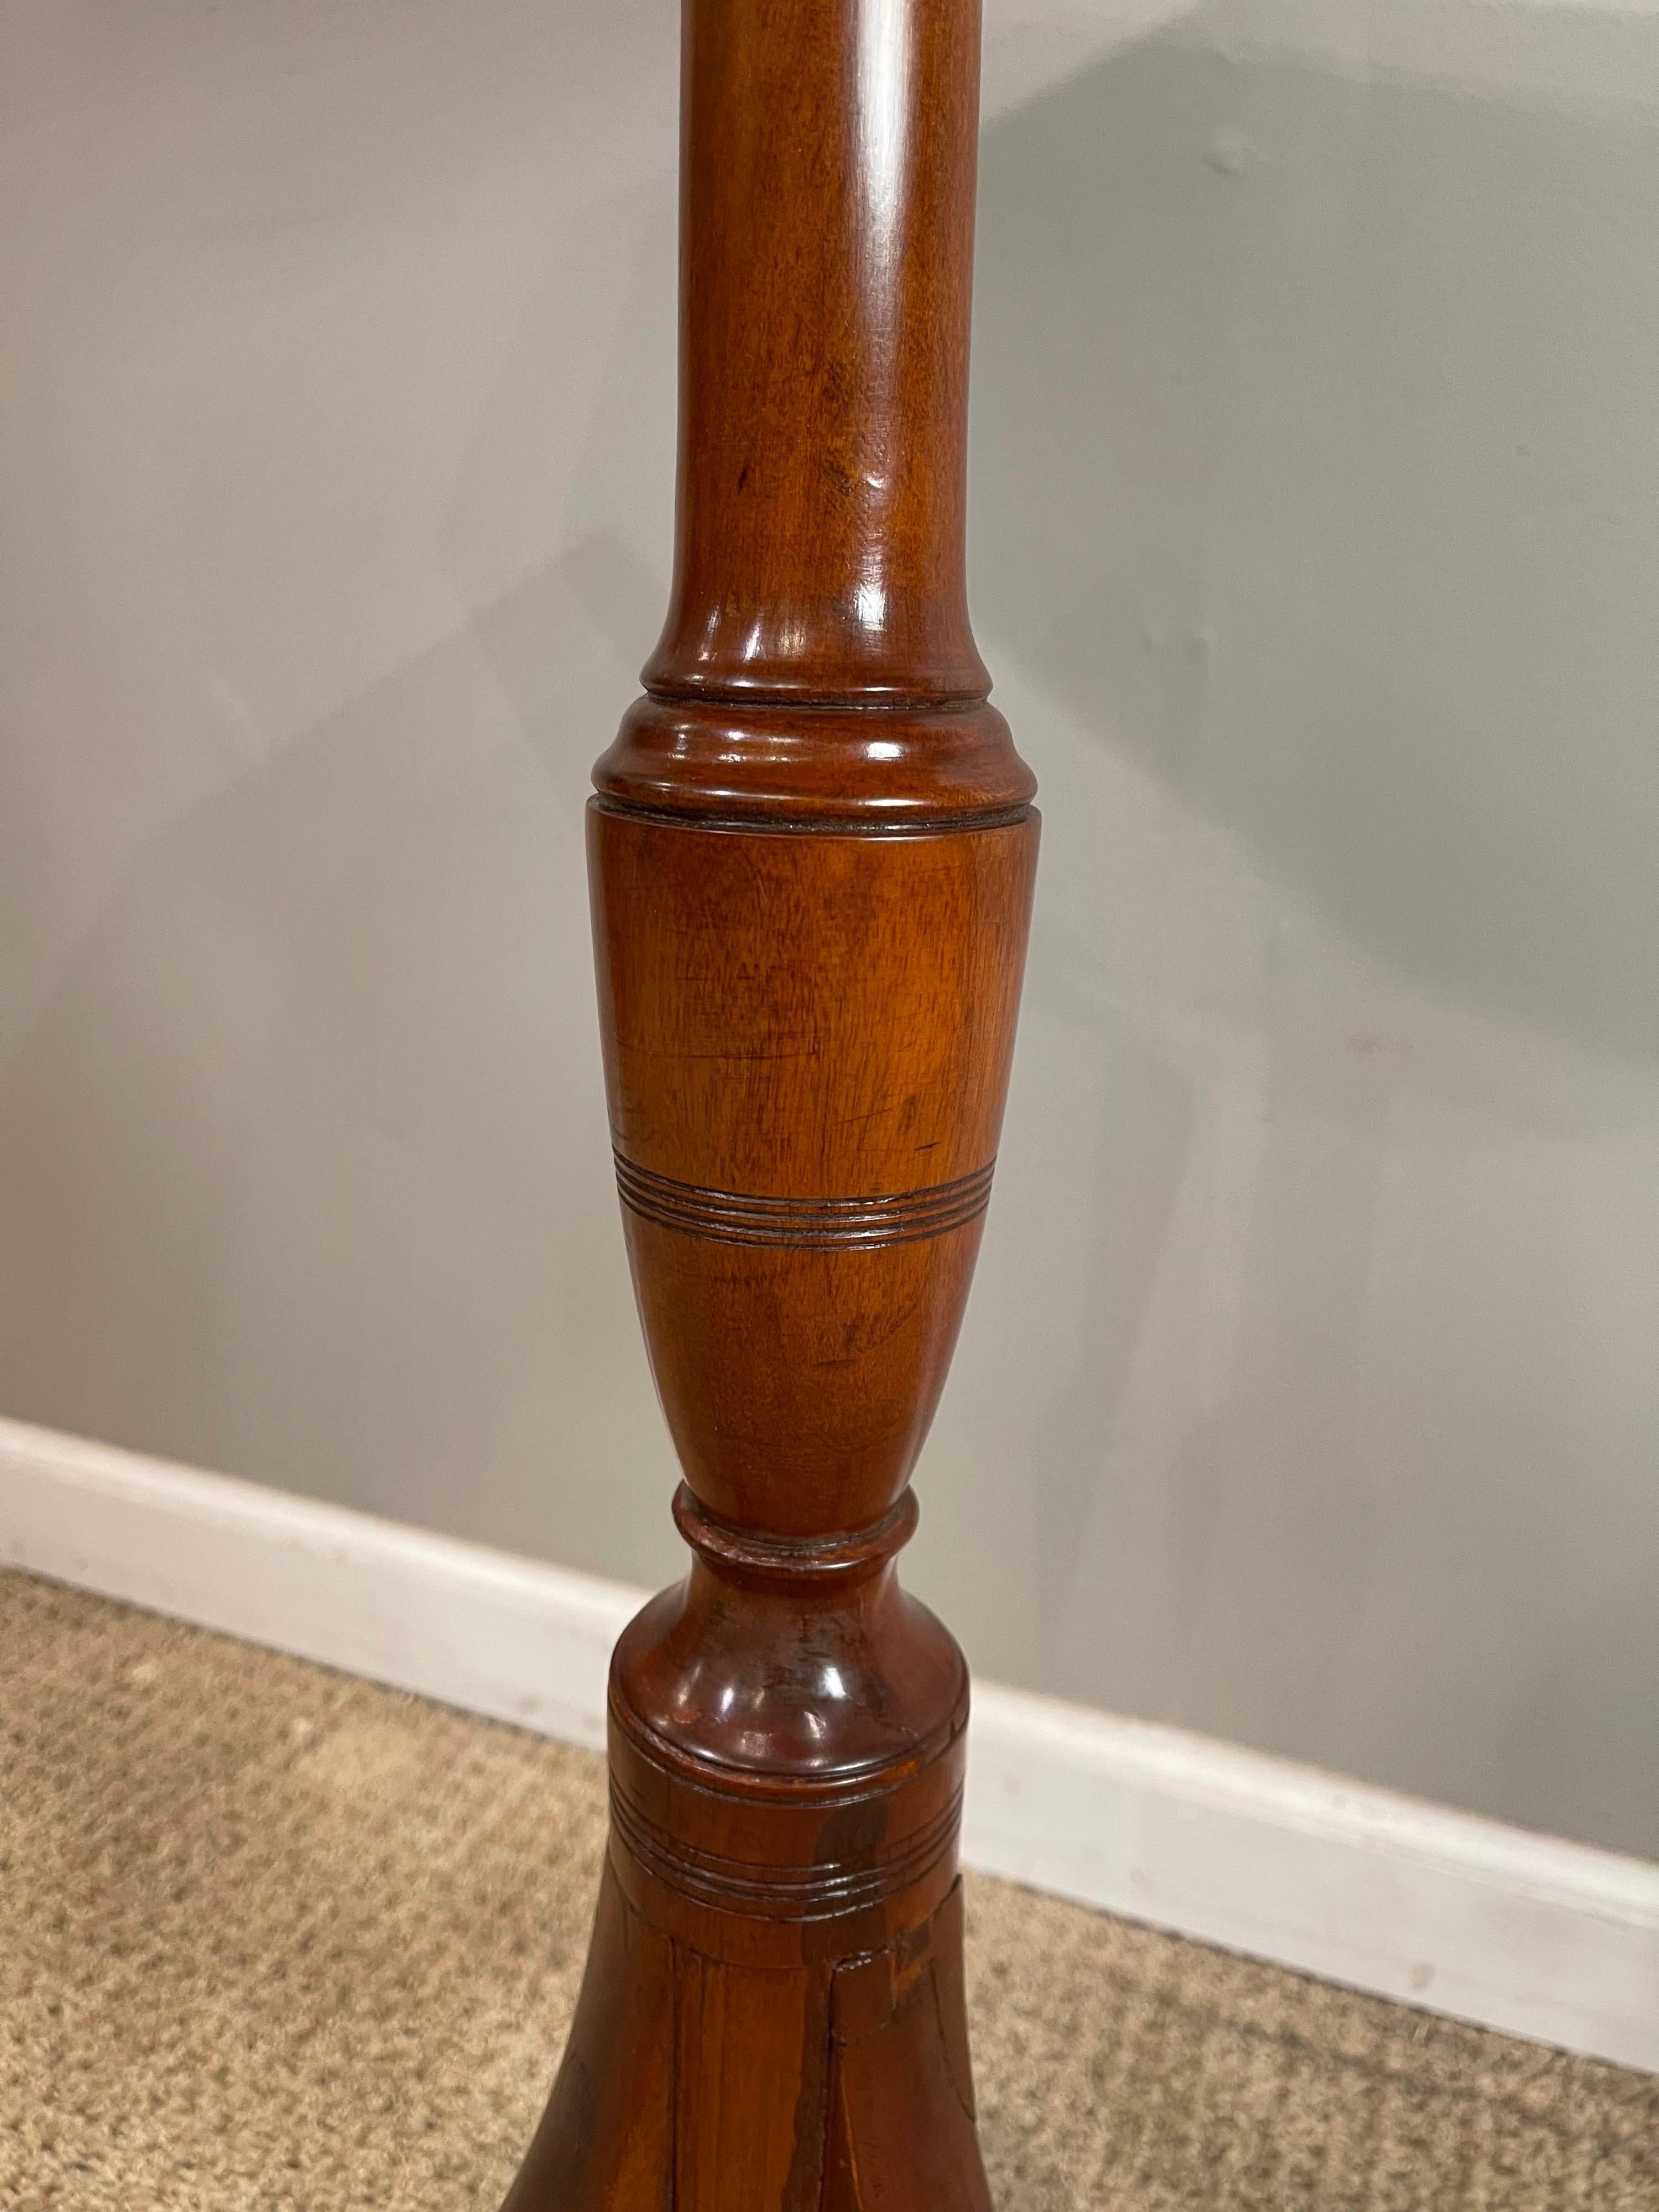 Federal Tiger Maple Tripod Table, American, Early 19th Century For Sale 8